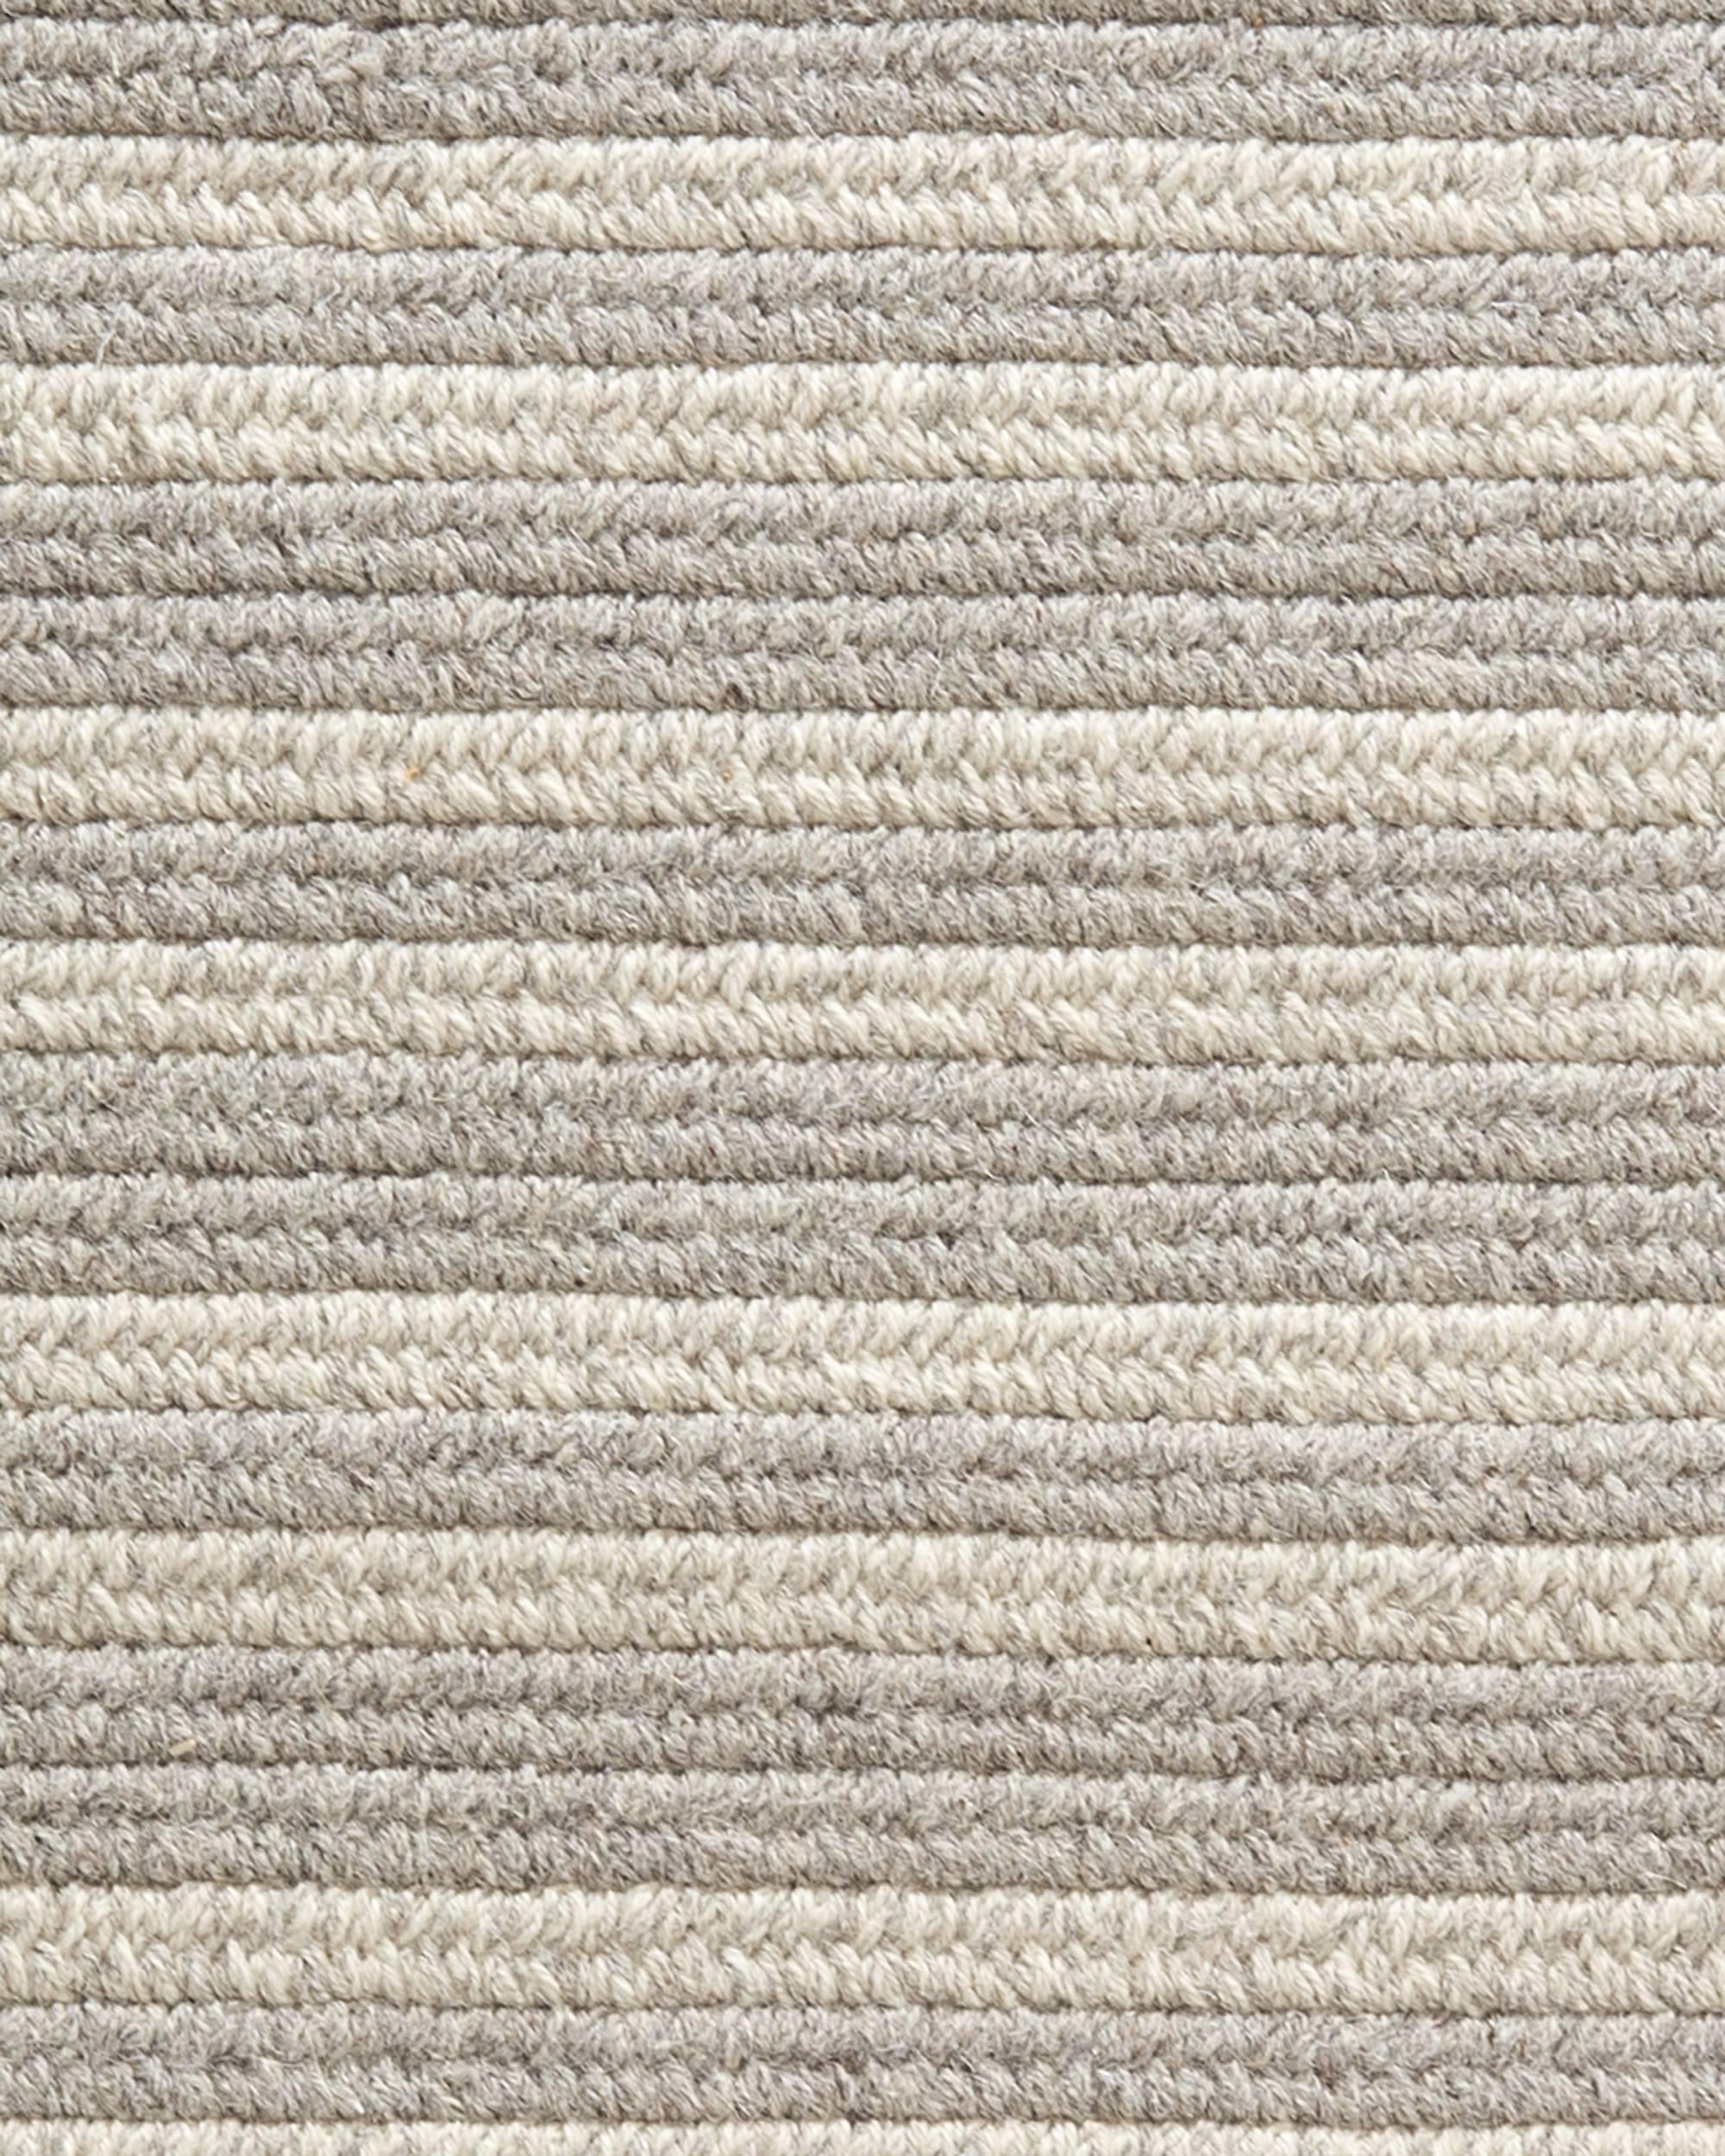 Cayo light grey natural un-dyed wool 8'x10' rectangle reversible rug, designed and crafted in the USA by Thayer Design Studio (Best of Houzz Design 2018). Thick, chunky woven braids of light grey are combined with a cream tonal tweed in natural